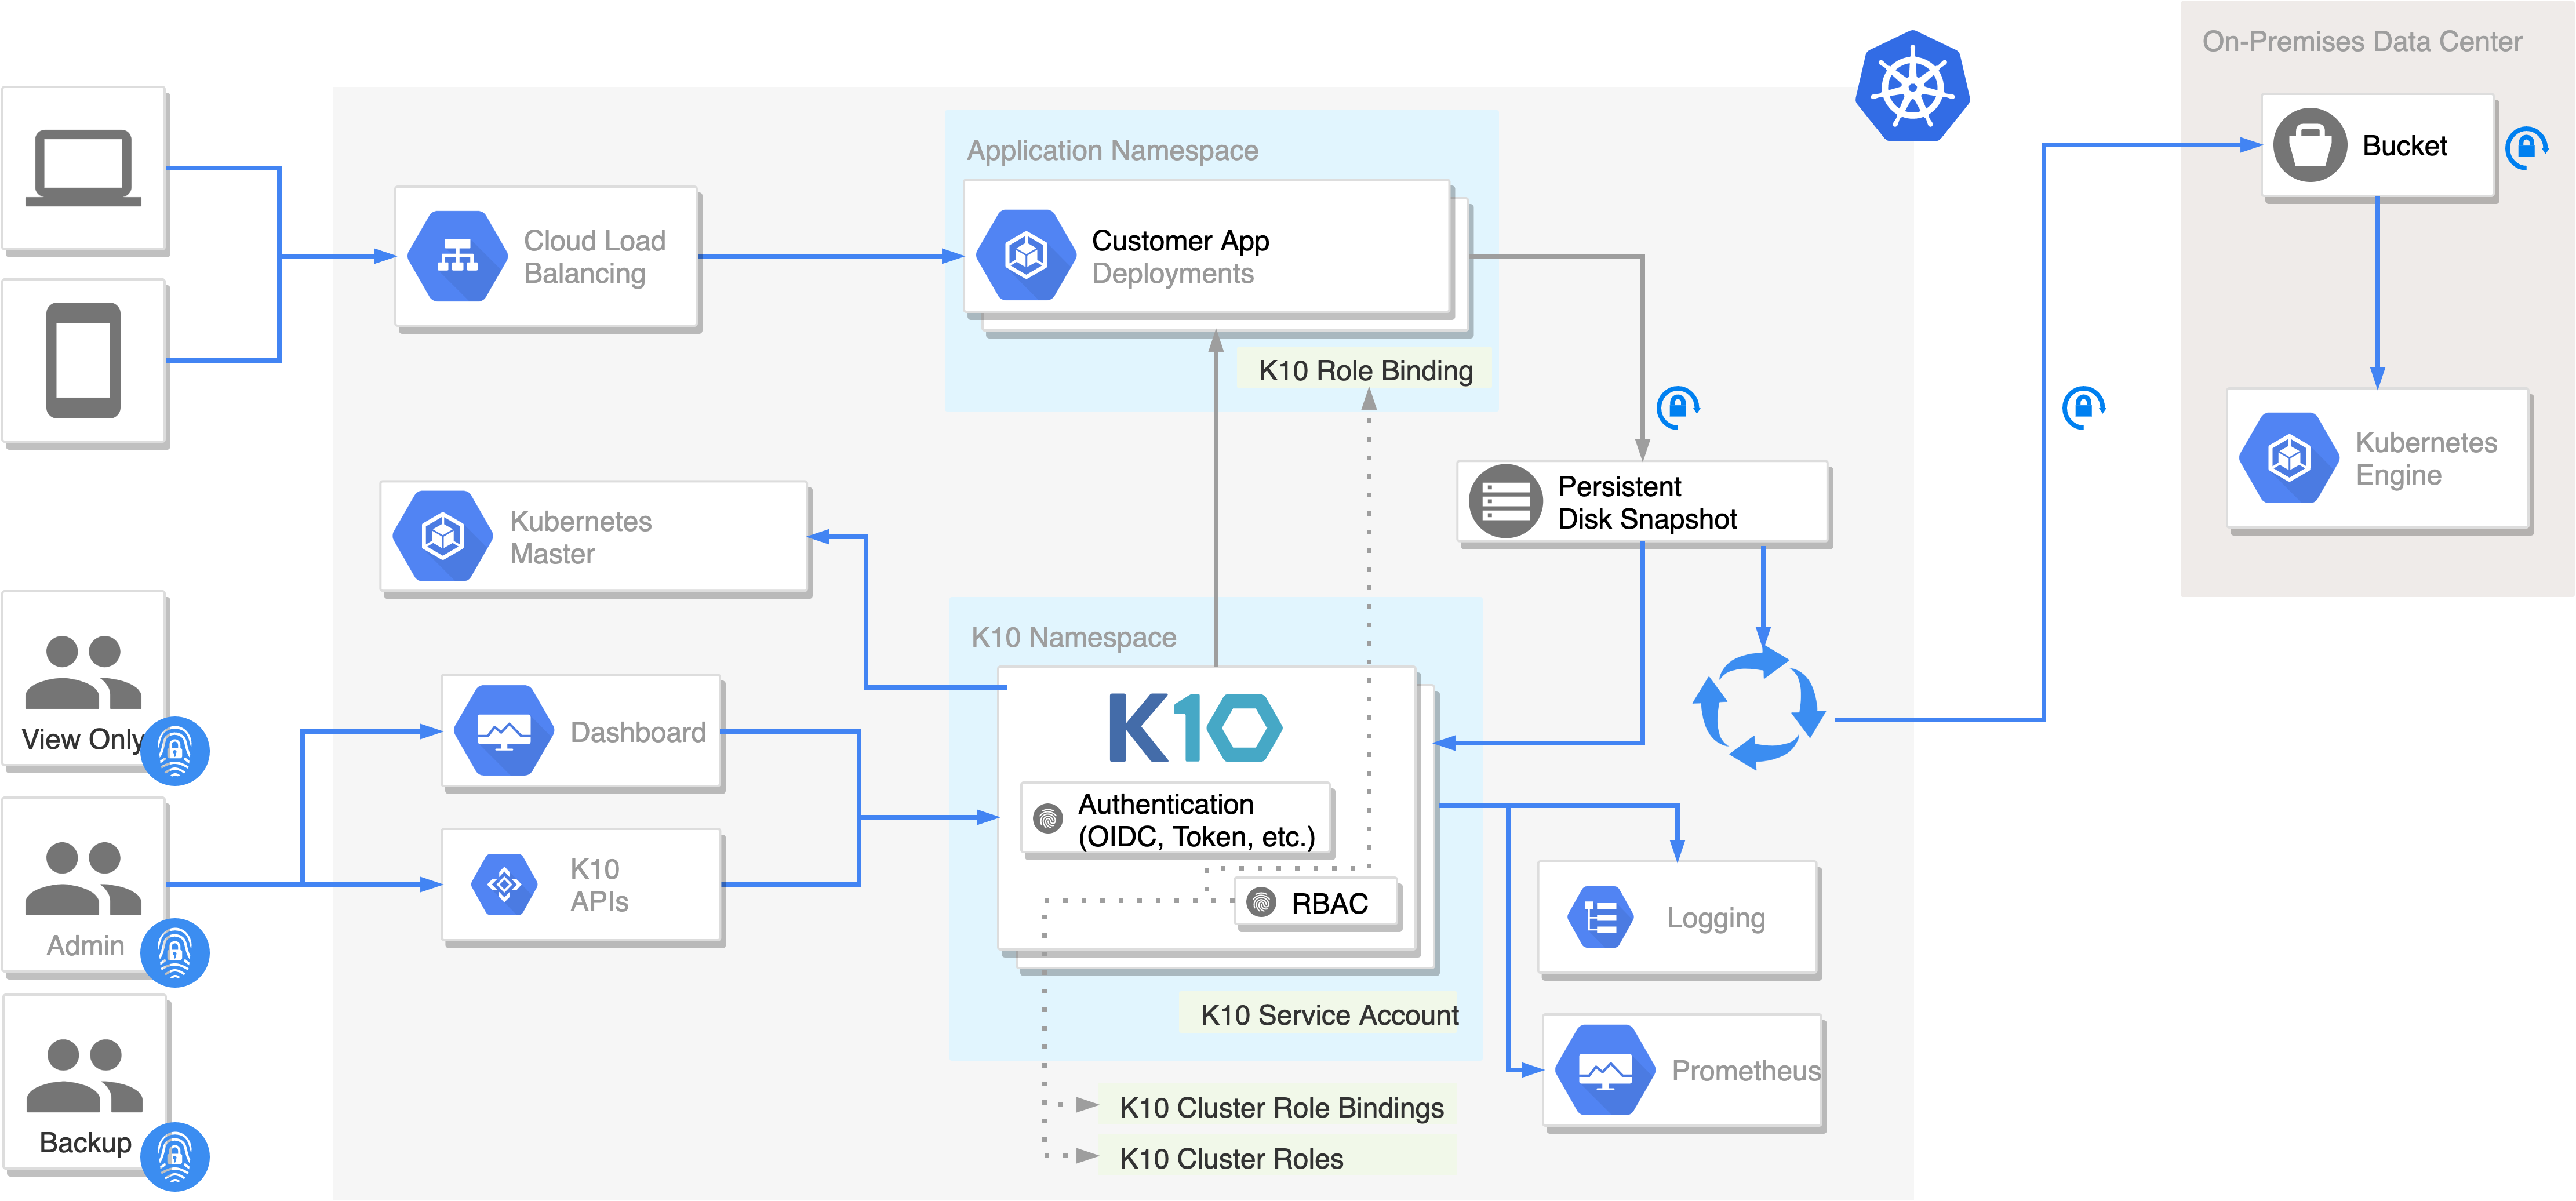 K10 v2.0 Security Features